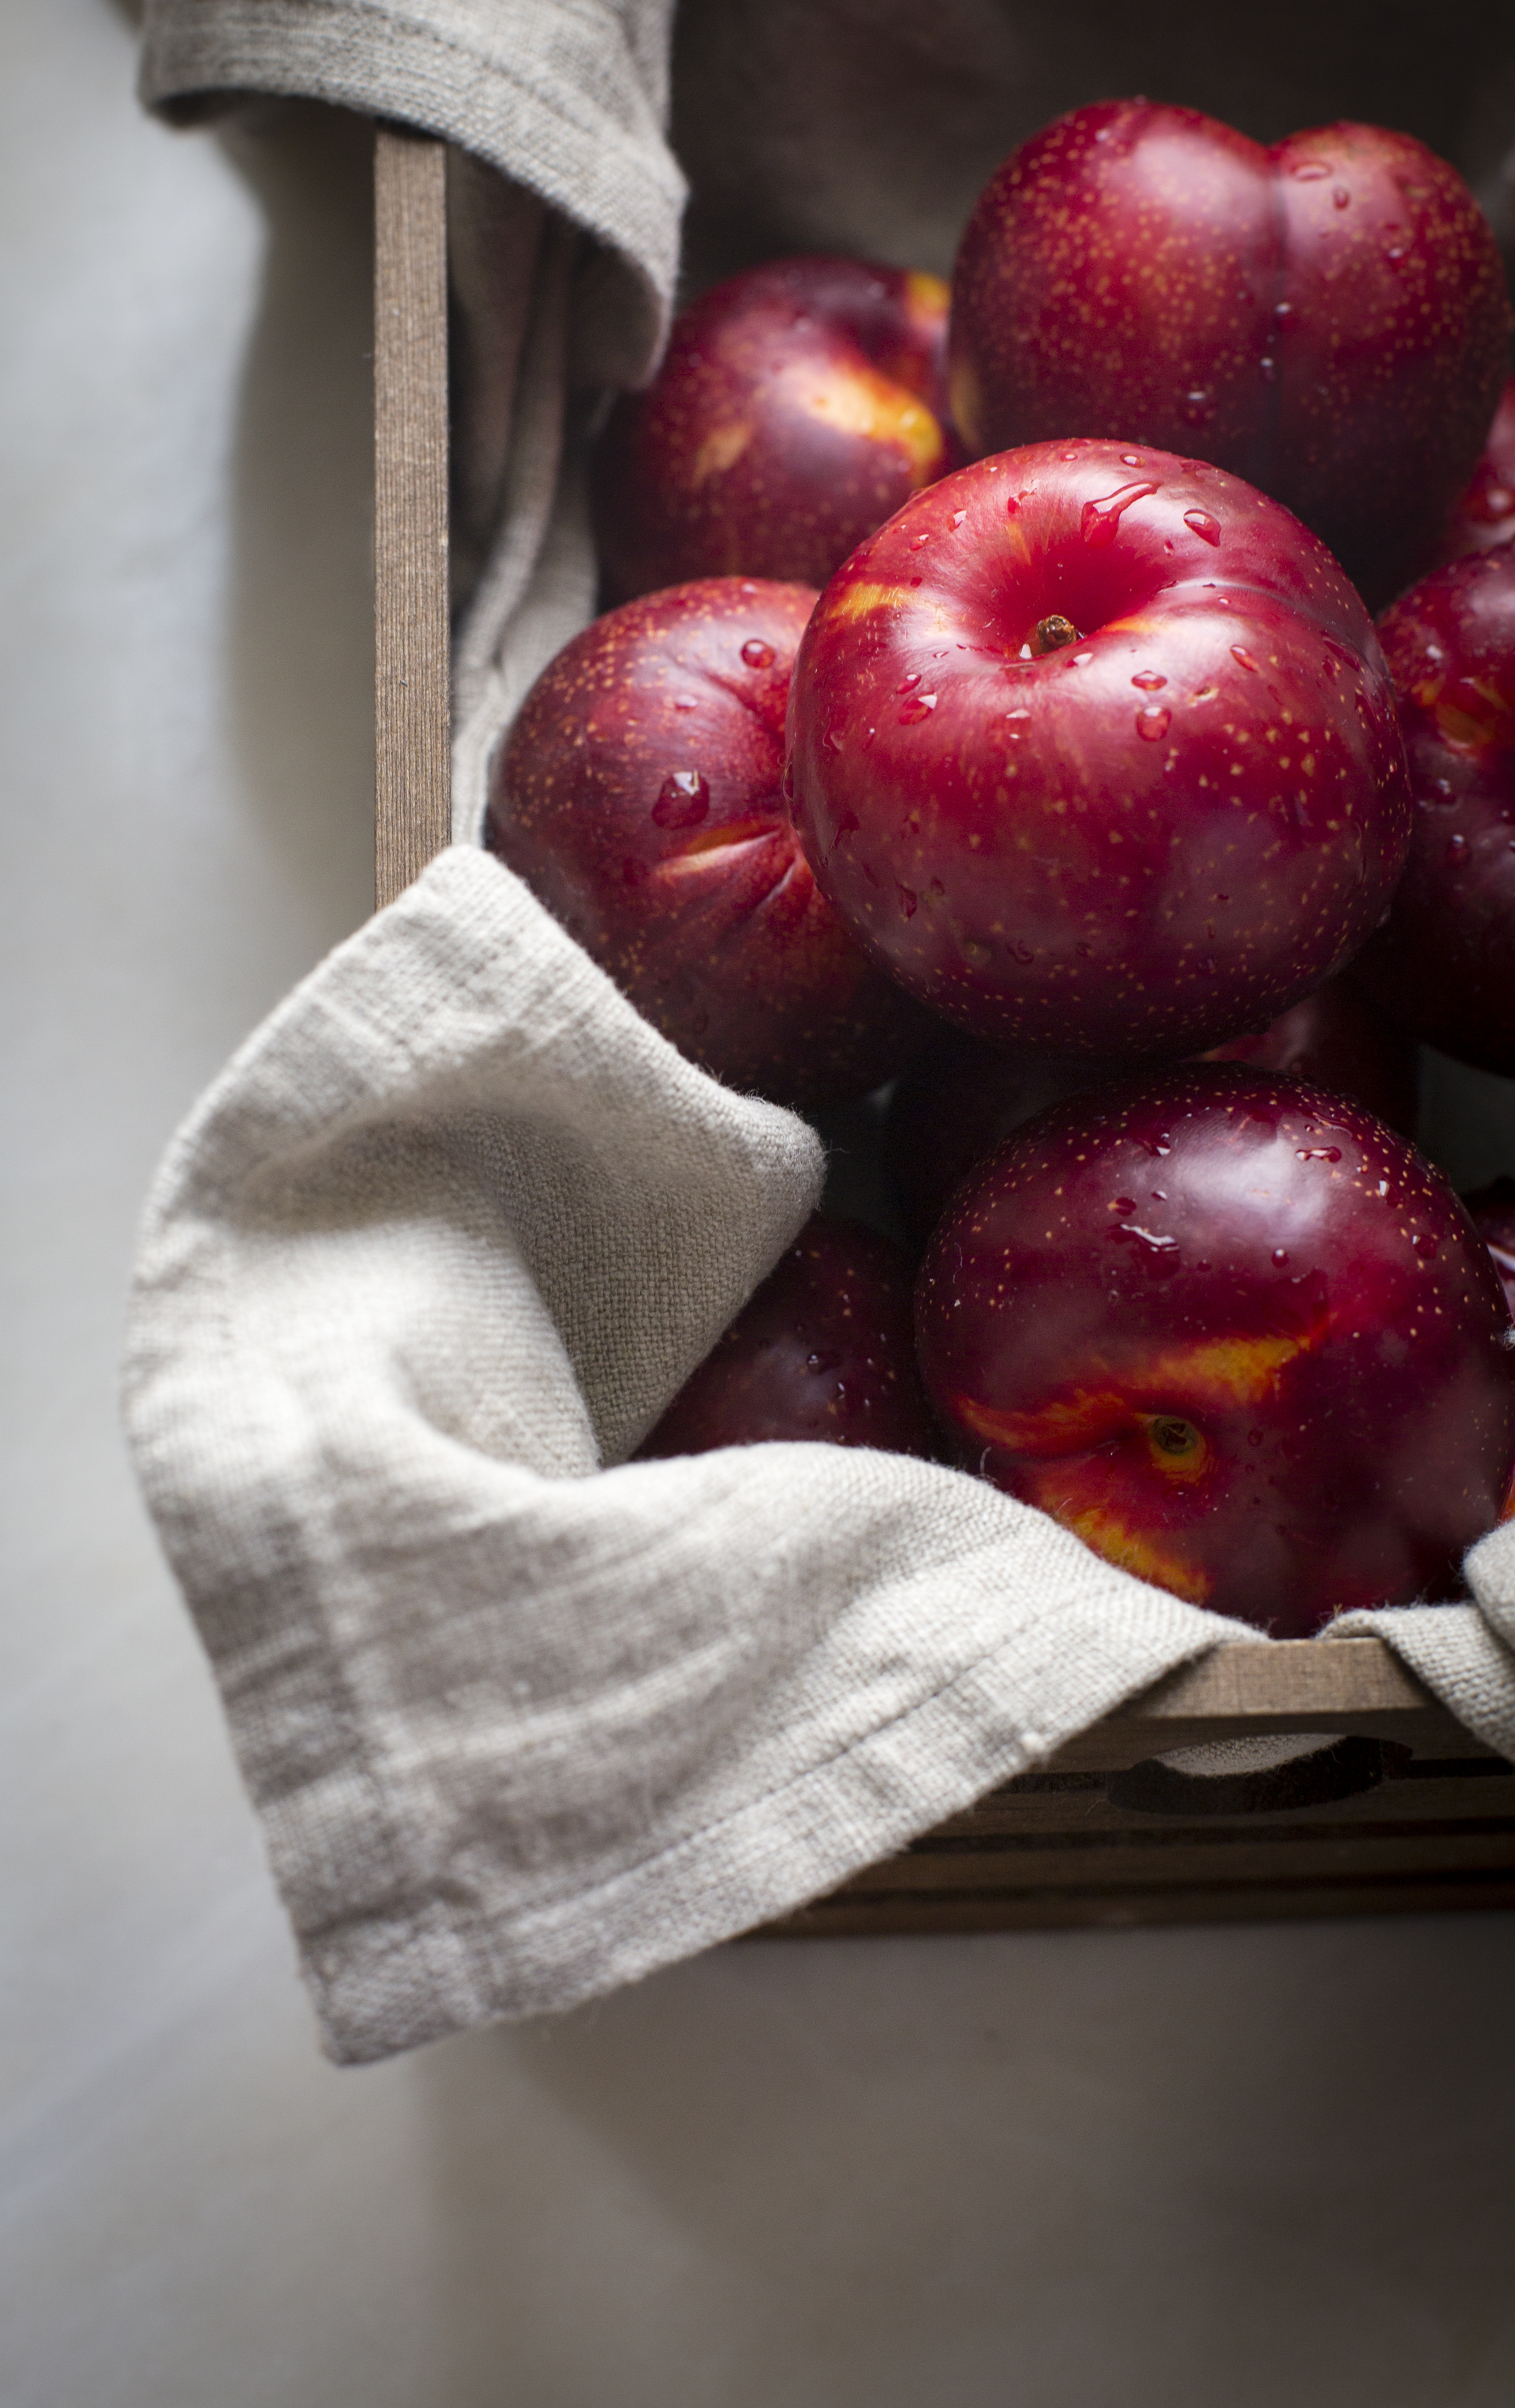 STILL LIFE PHOTOGRAPHY - PLUMS